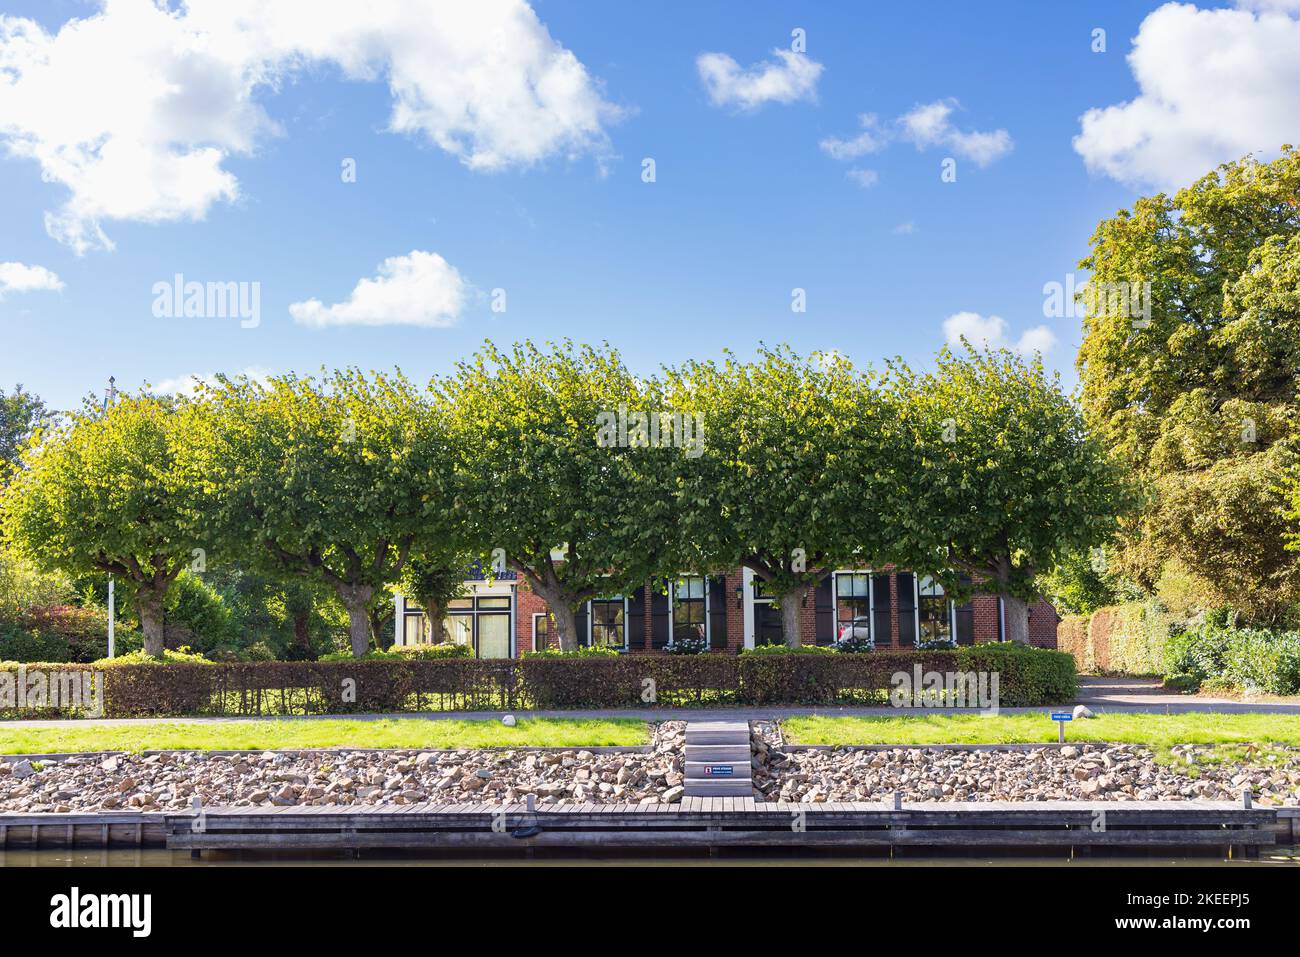 Scenic view of small village Briltil, municipality Westerkwartier in Groningen province in the Netherlands Stock Photo